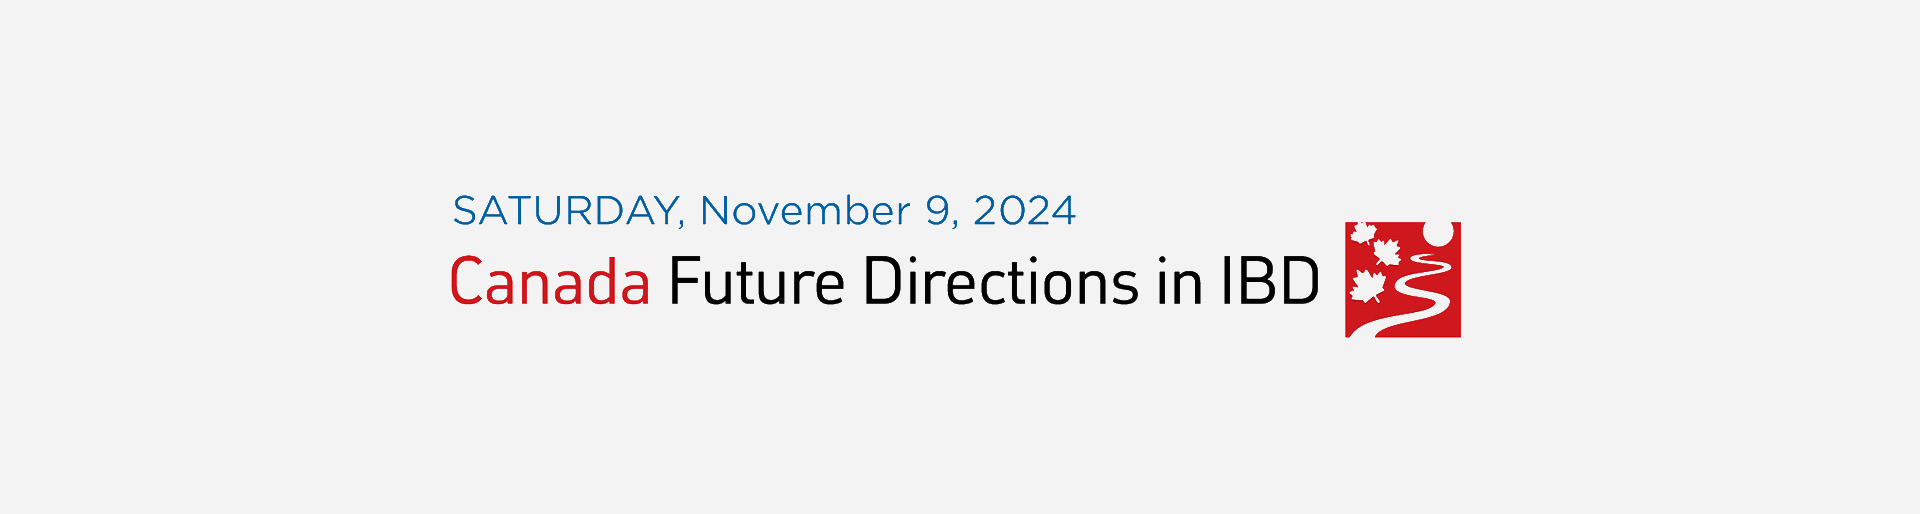 Canada Future Directions in IBD Banner